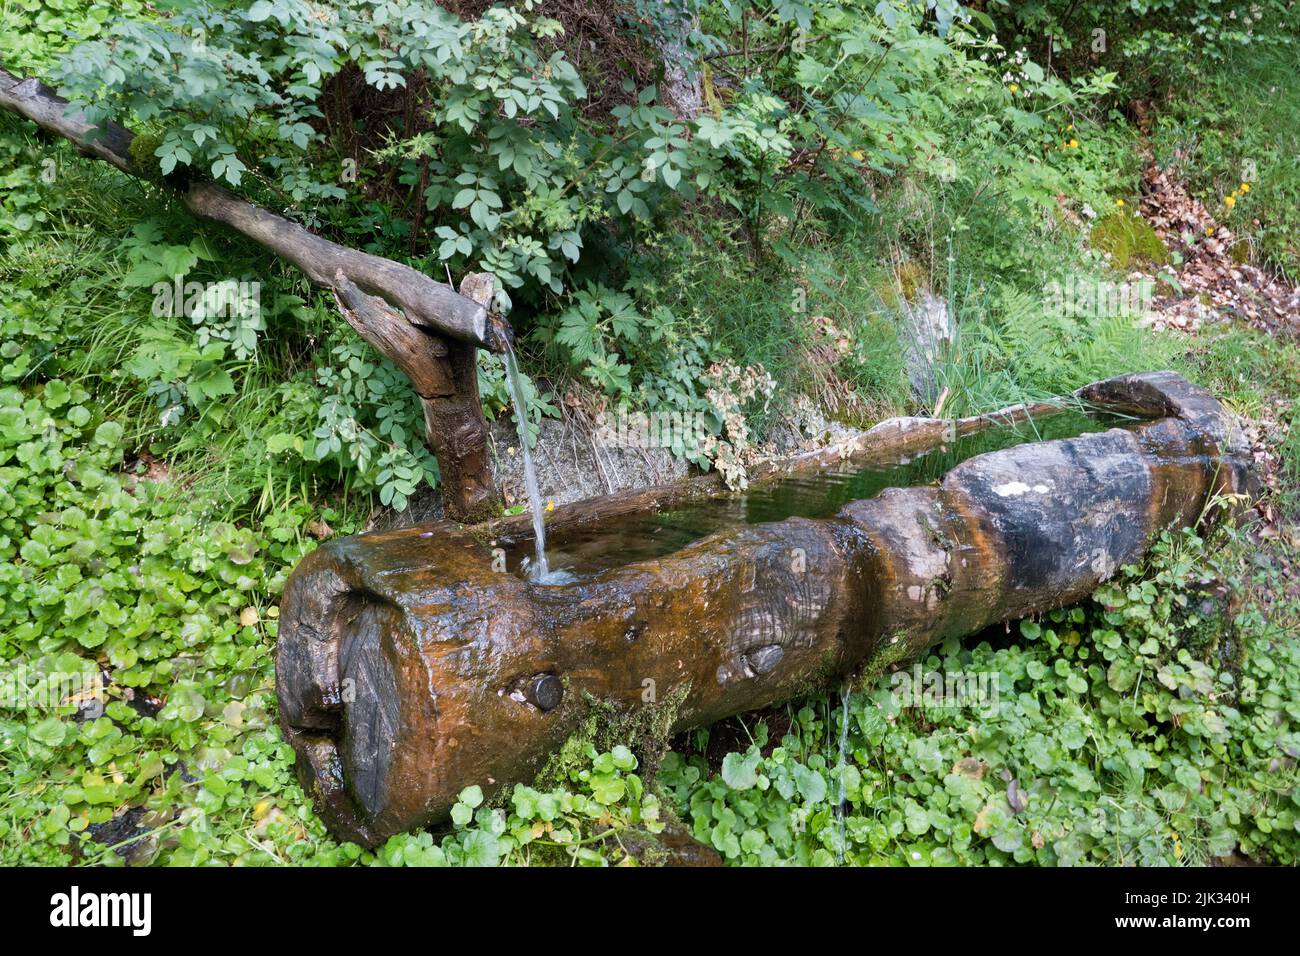 Cattle drinking trough filled with cool, flowing water, carved from a tree trunk Stock Photo